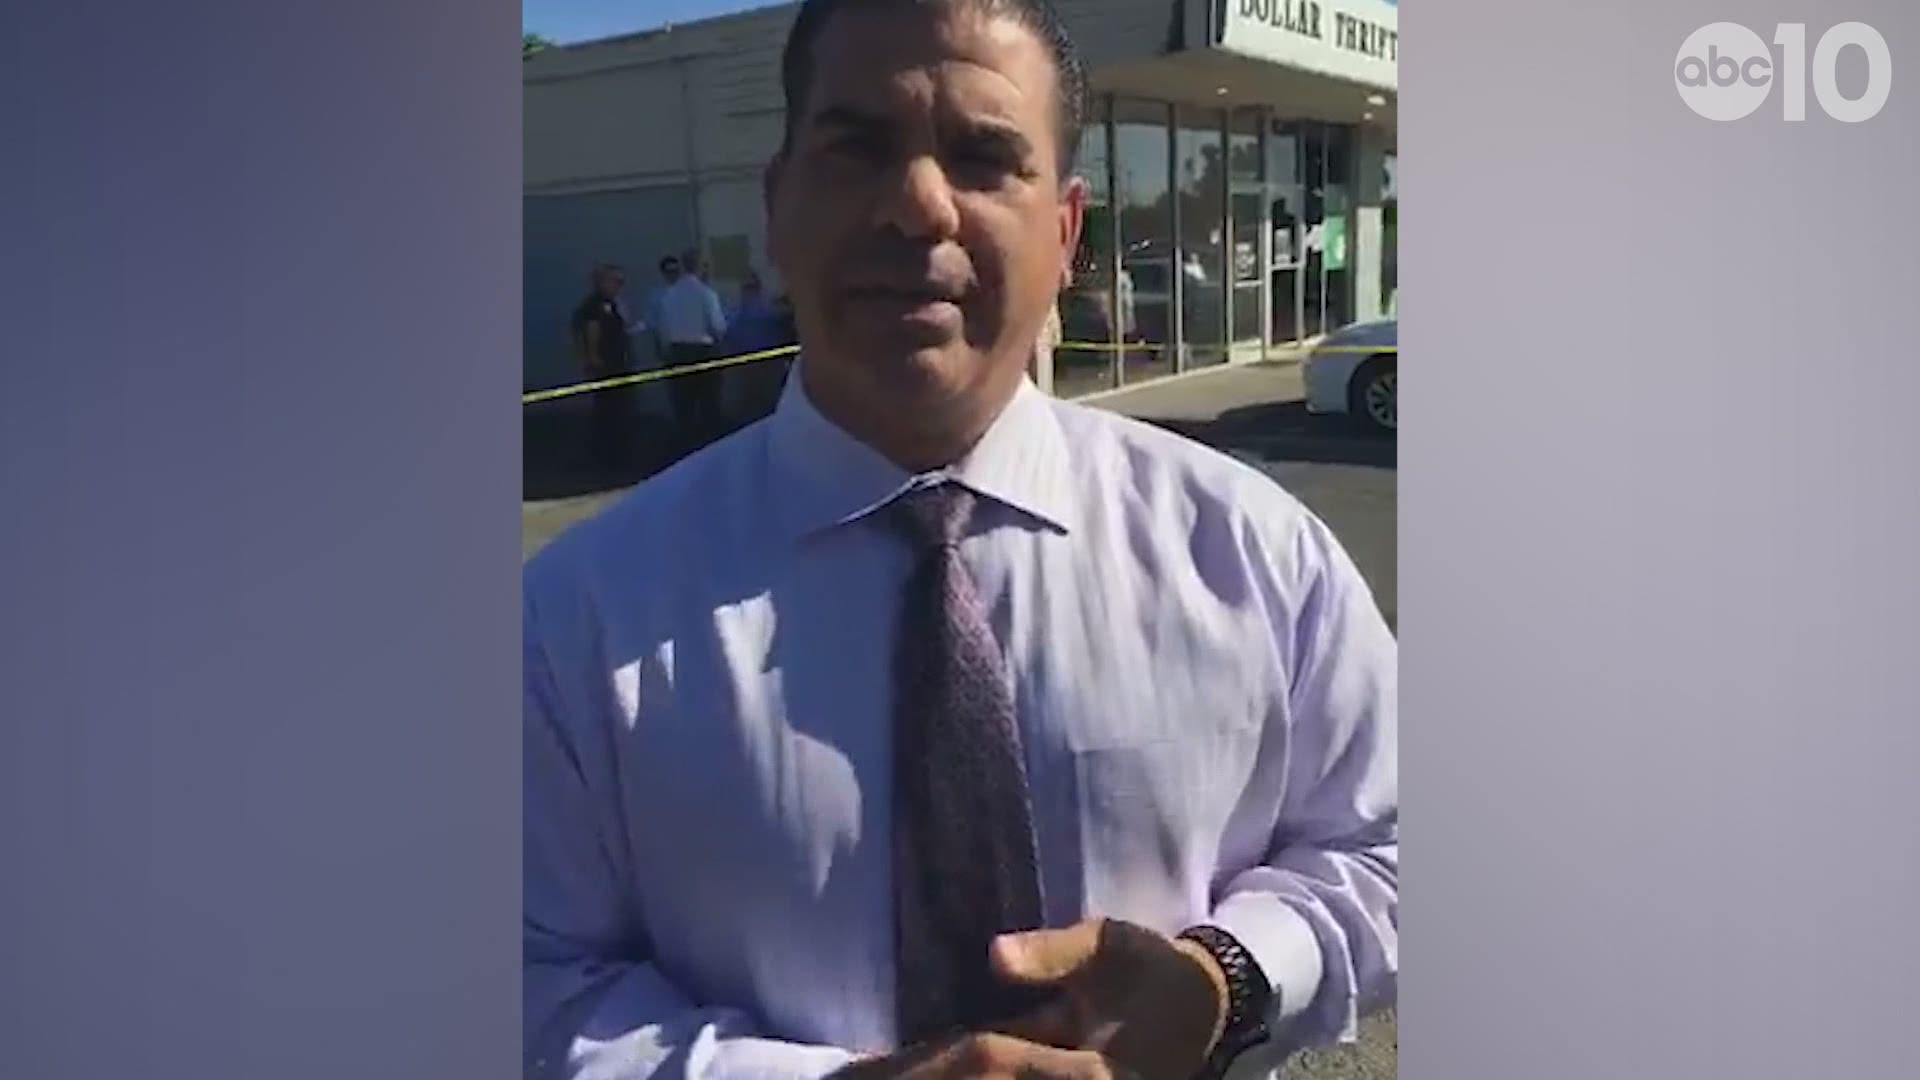 Sacramento Sheriff's Deputy Tony Trumbull gives the first update on the deadly shooting behind a strip mall in north Sacramento, Thursday afternoon. Read the full story: https://bit.ly/2YifZAt